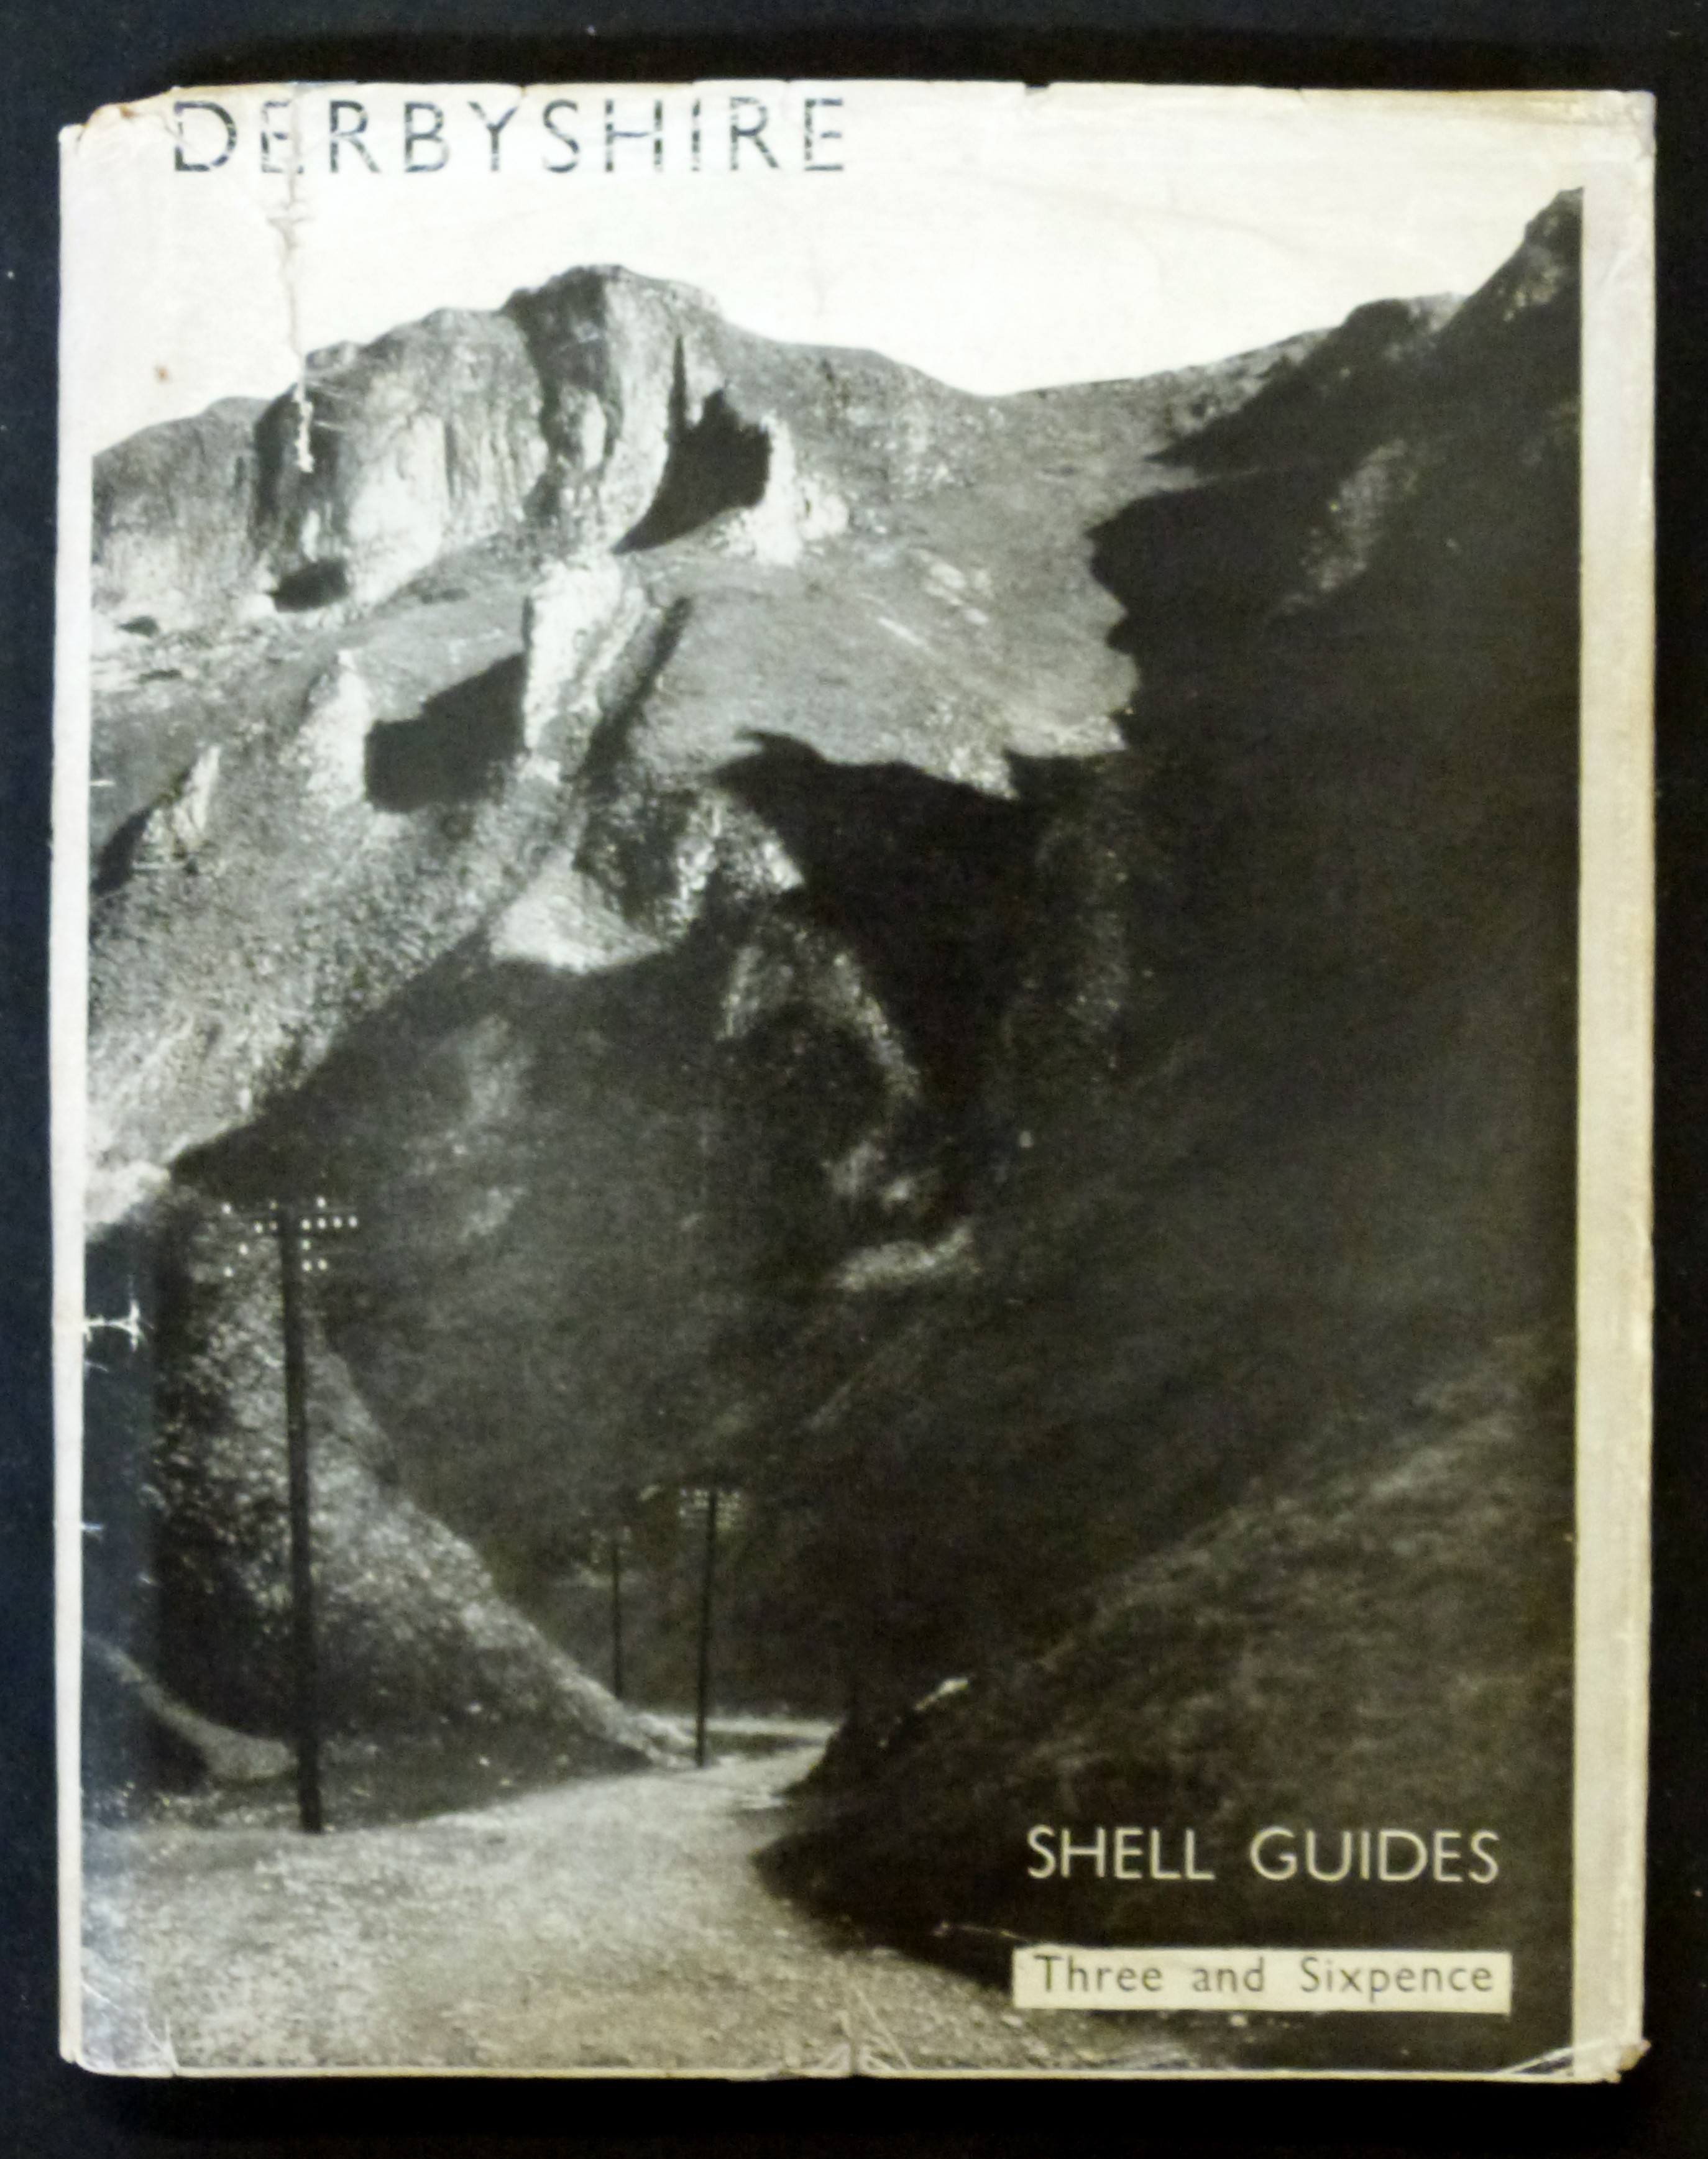 CHRISTOPHER HOBHOUSE (ED): SHELL GUIDE TO DERBYSHIRE..., London, Faber & Faber, [1939], 1st